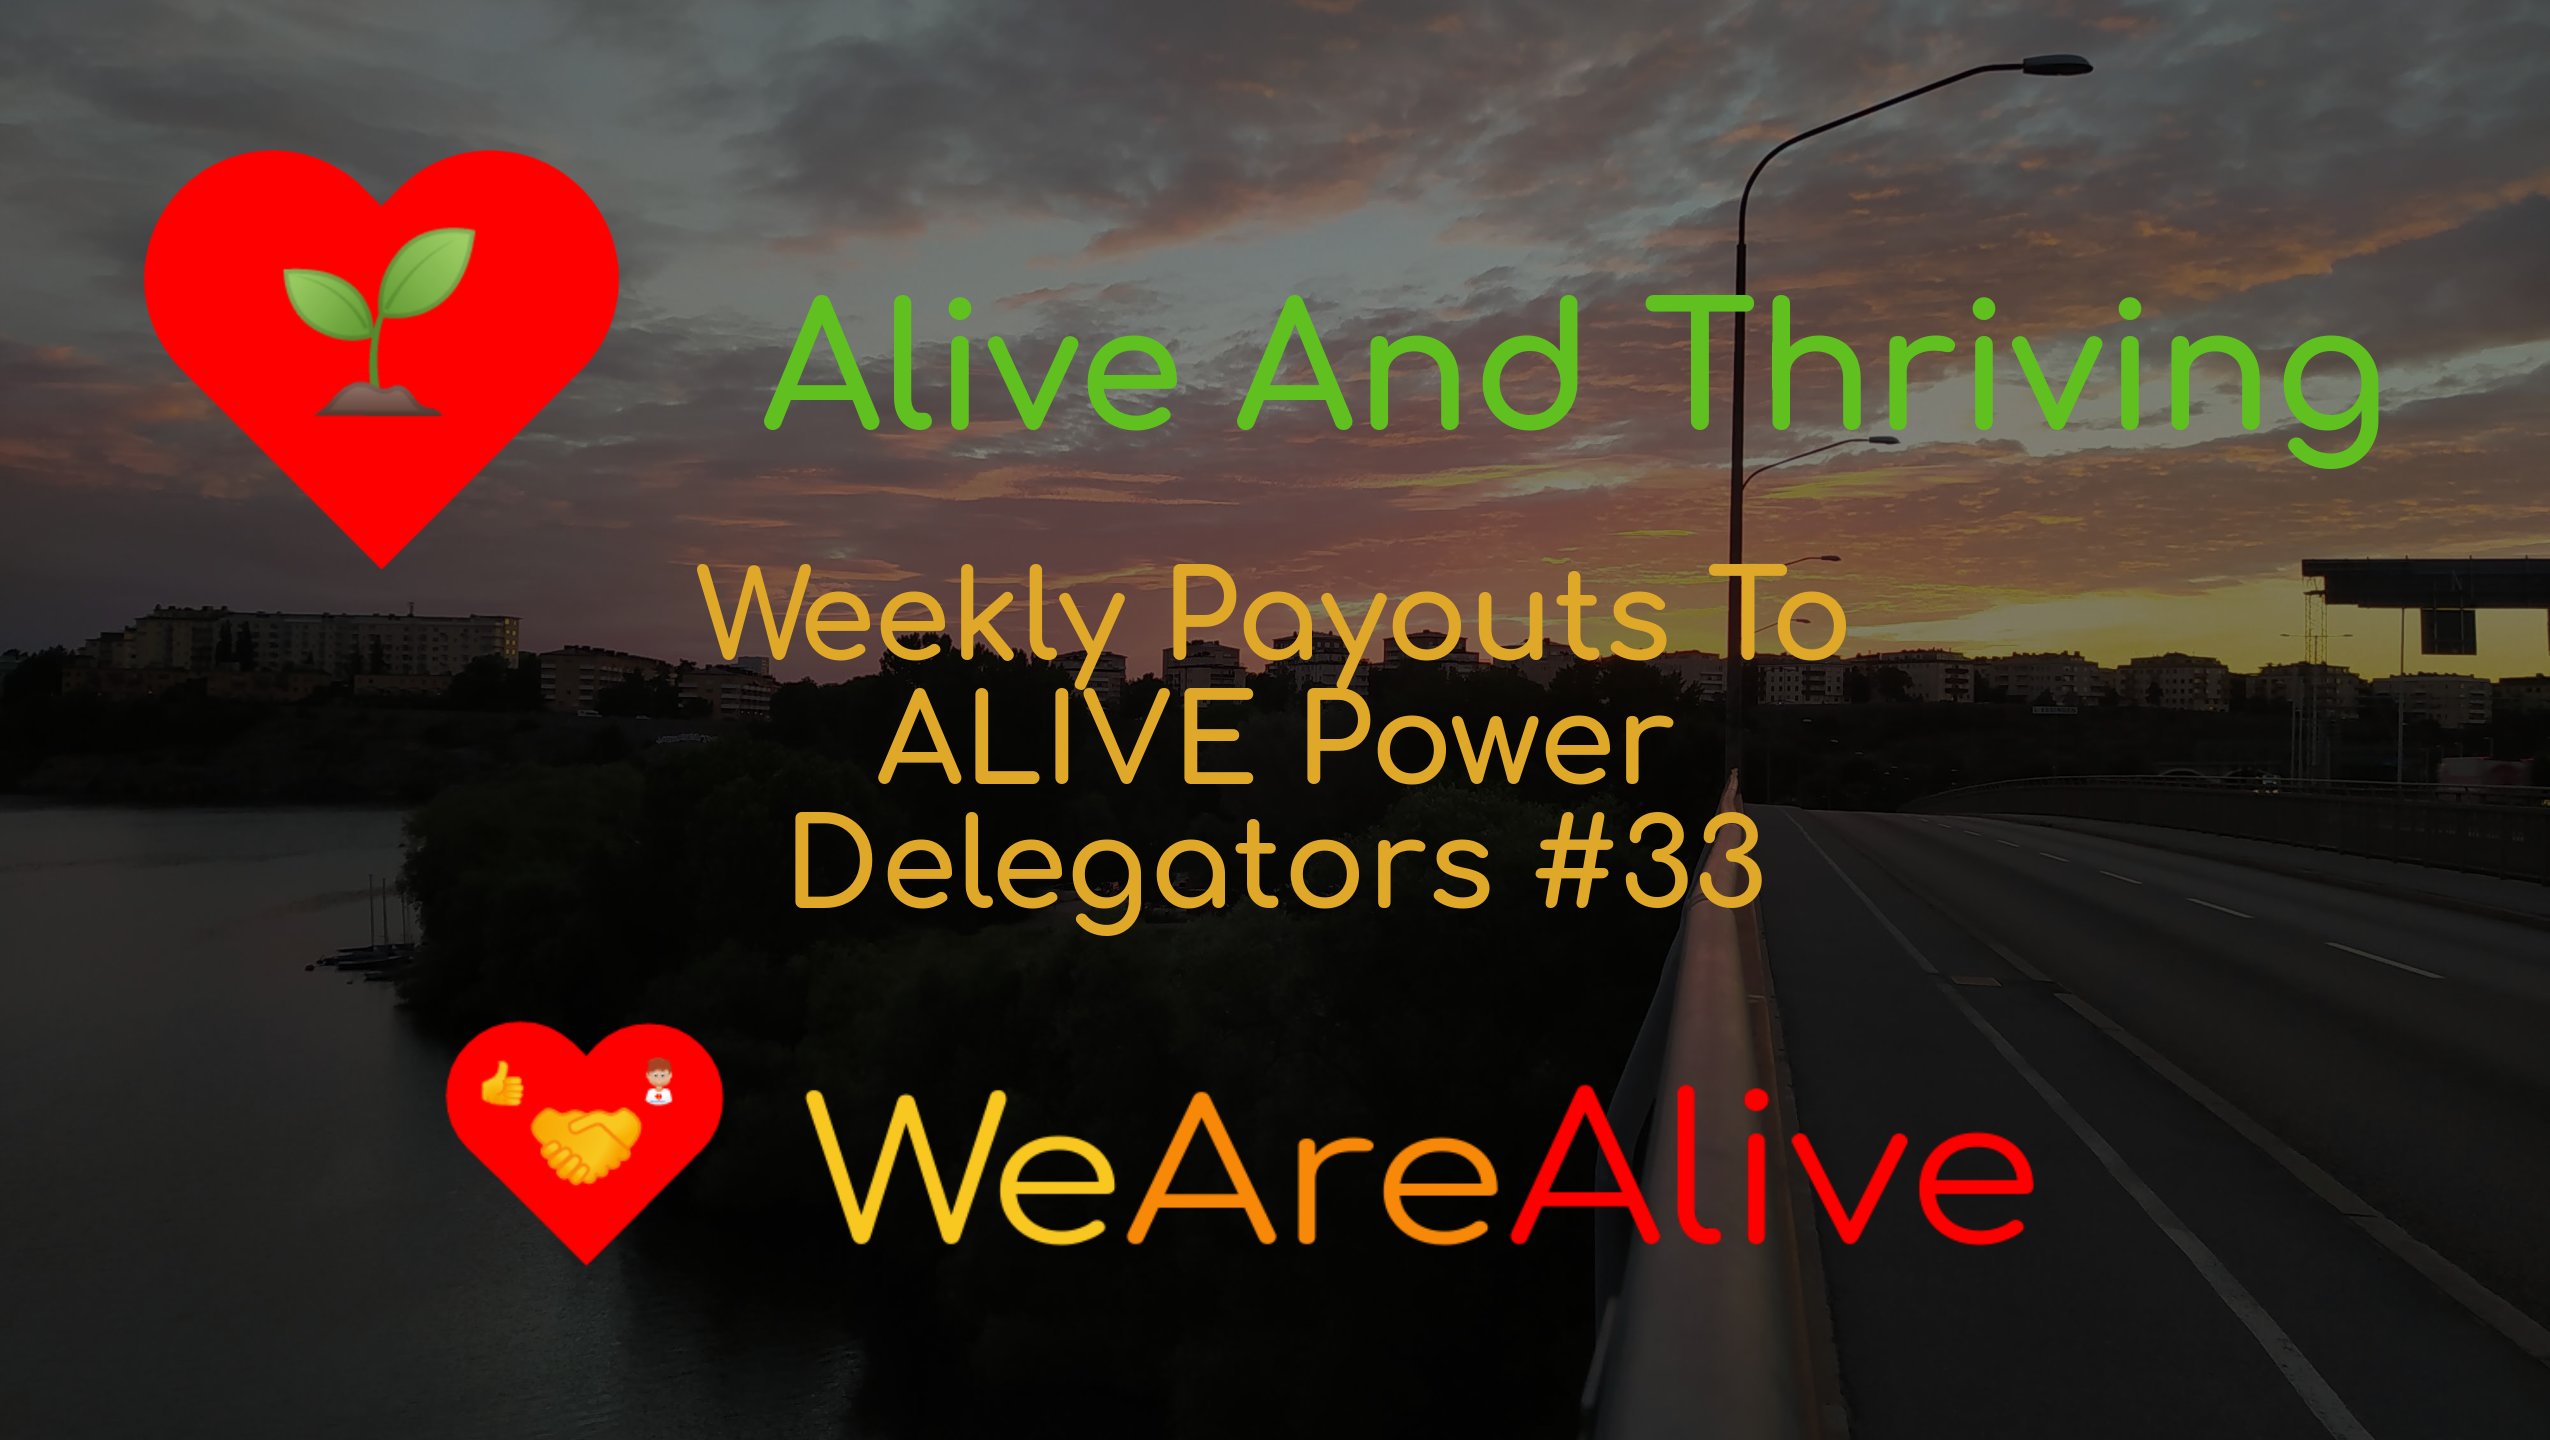 @wearealive/alive-and-thriving-weekly-payouts-to-alive-power-delegators-33